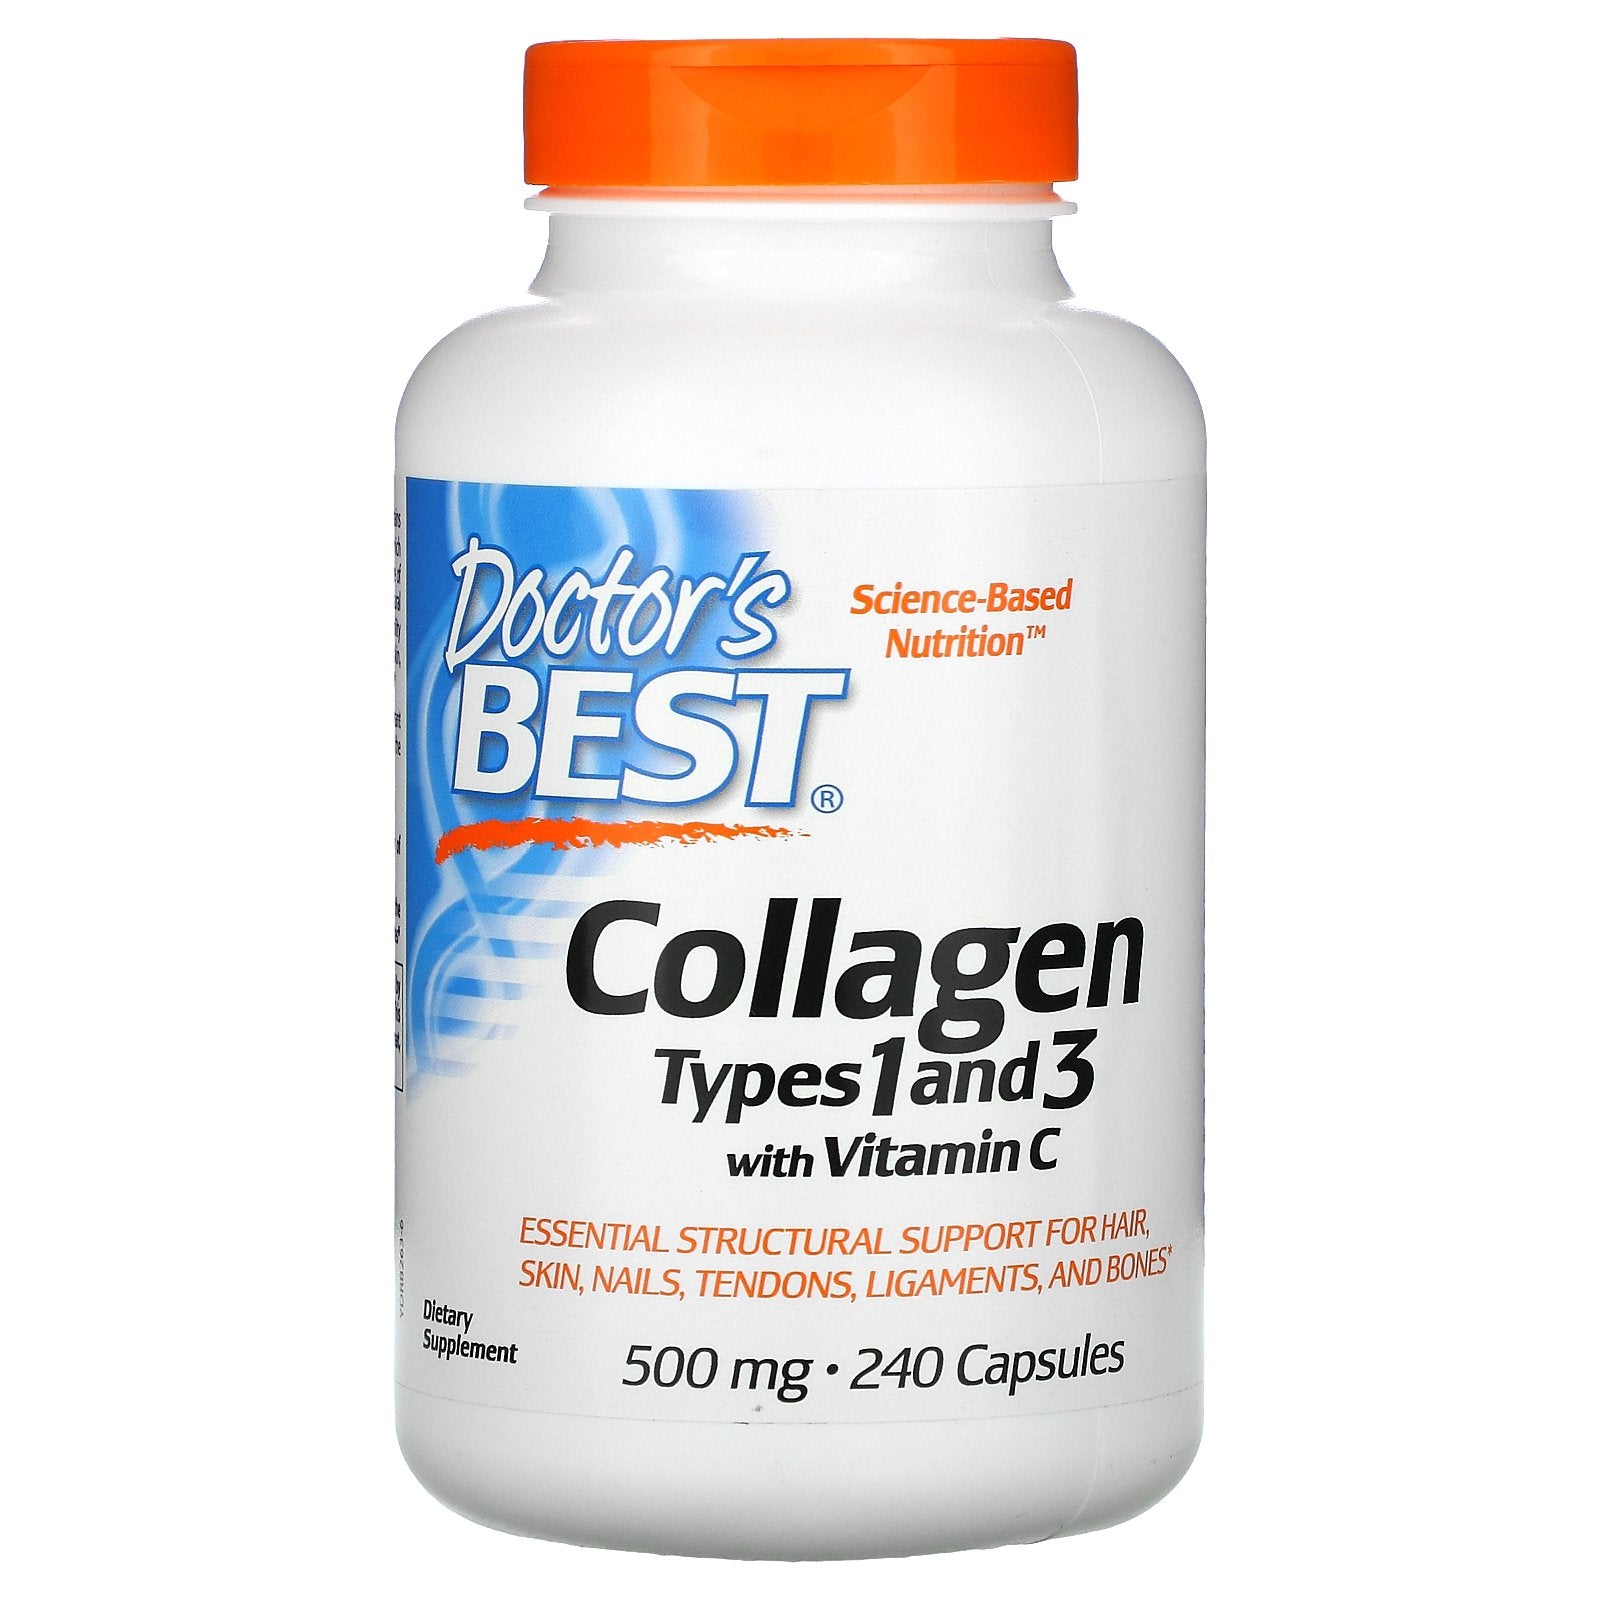 Doctor's Best, Collagen Types 1 and 3 with Vitamin C, 500 mg, 240 Capsules